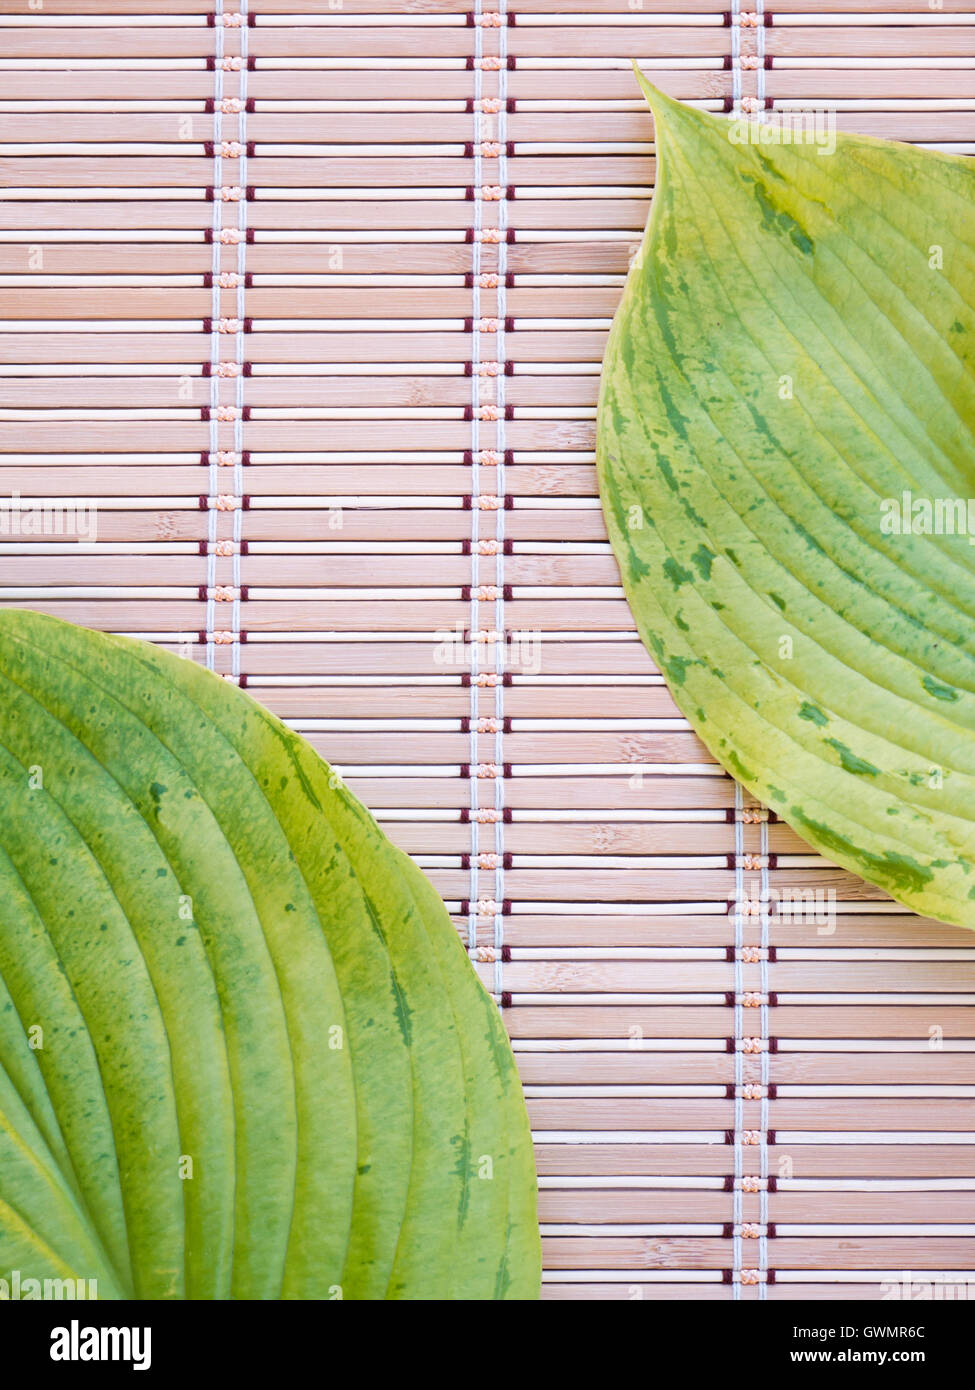 Two green hosta leaves with veins in the opposite corners of the bamboo mat Stock Photo